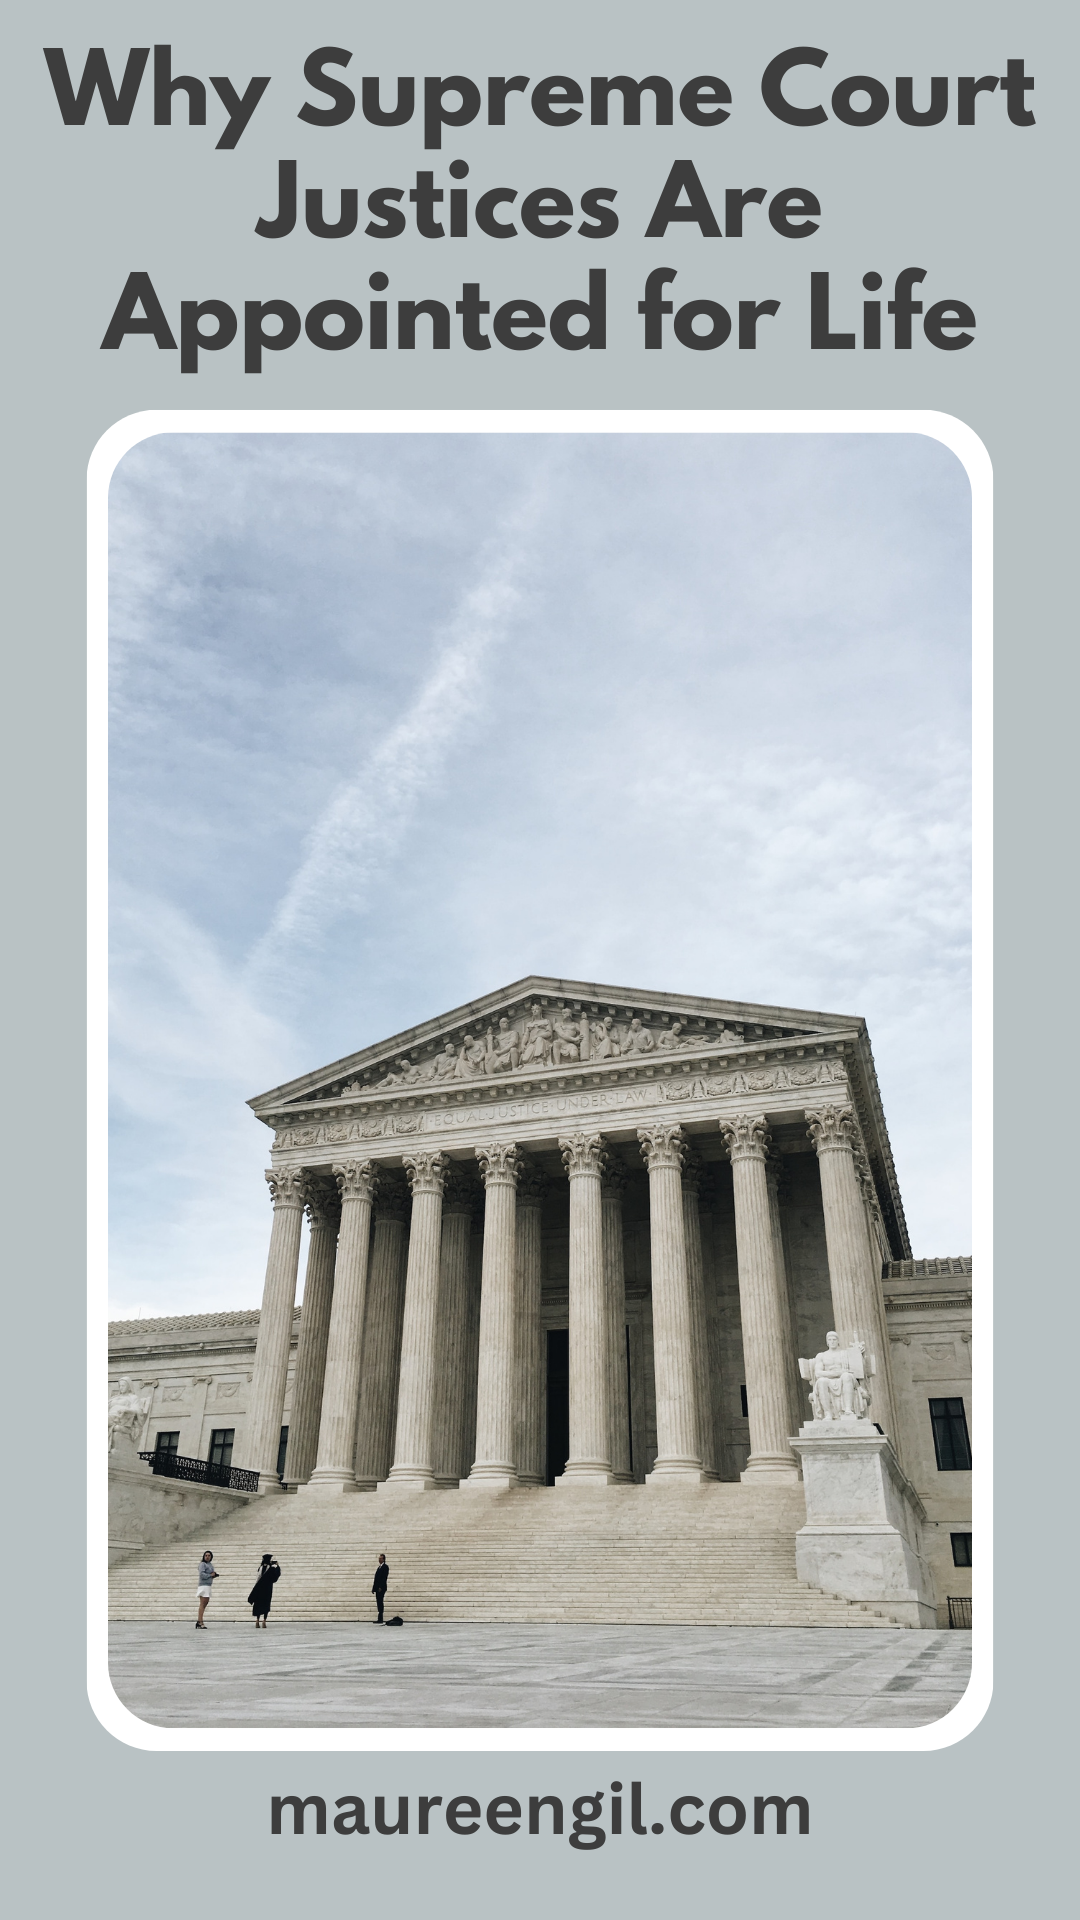 Why Supreme Court justices are appointed for life has been recently called into question especially with the highly charged, politicized decisions that have come out of the last few terms.